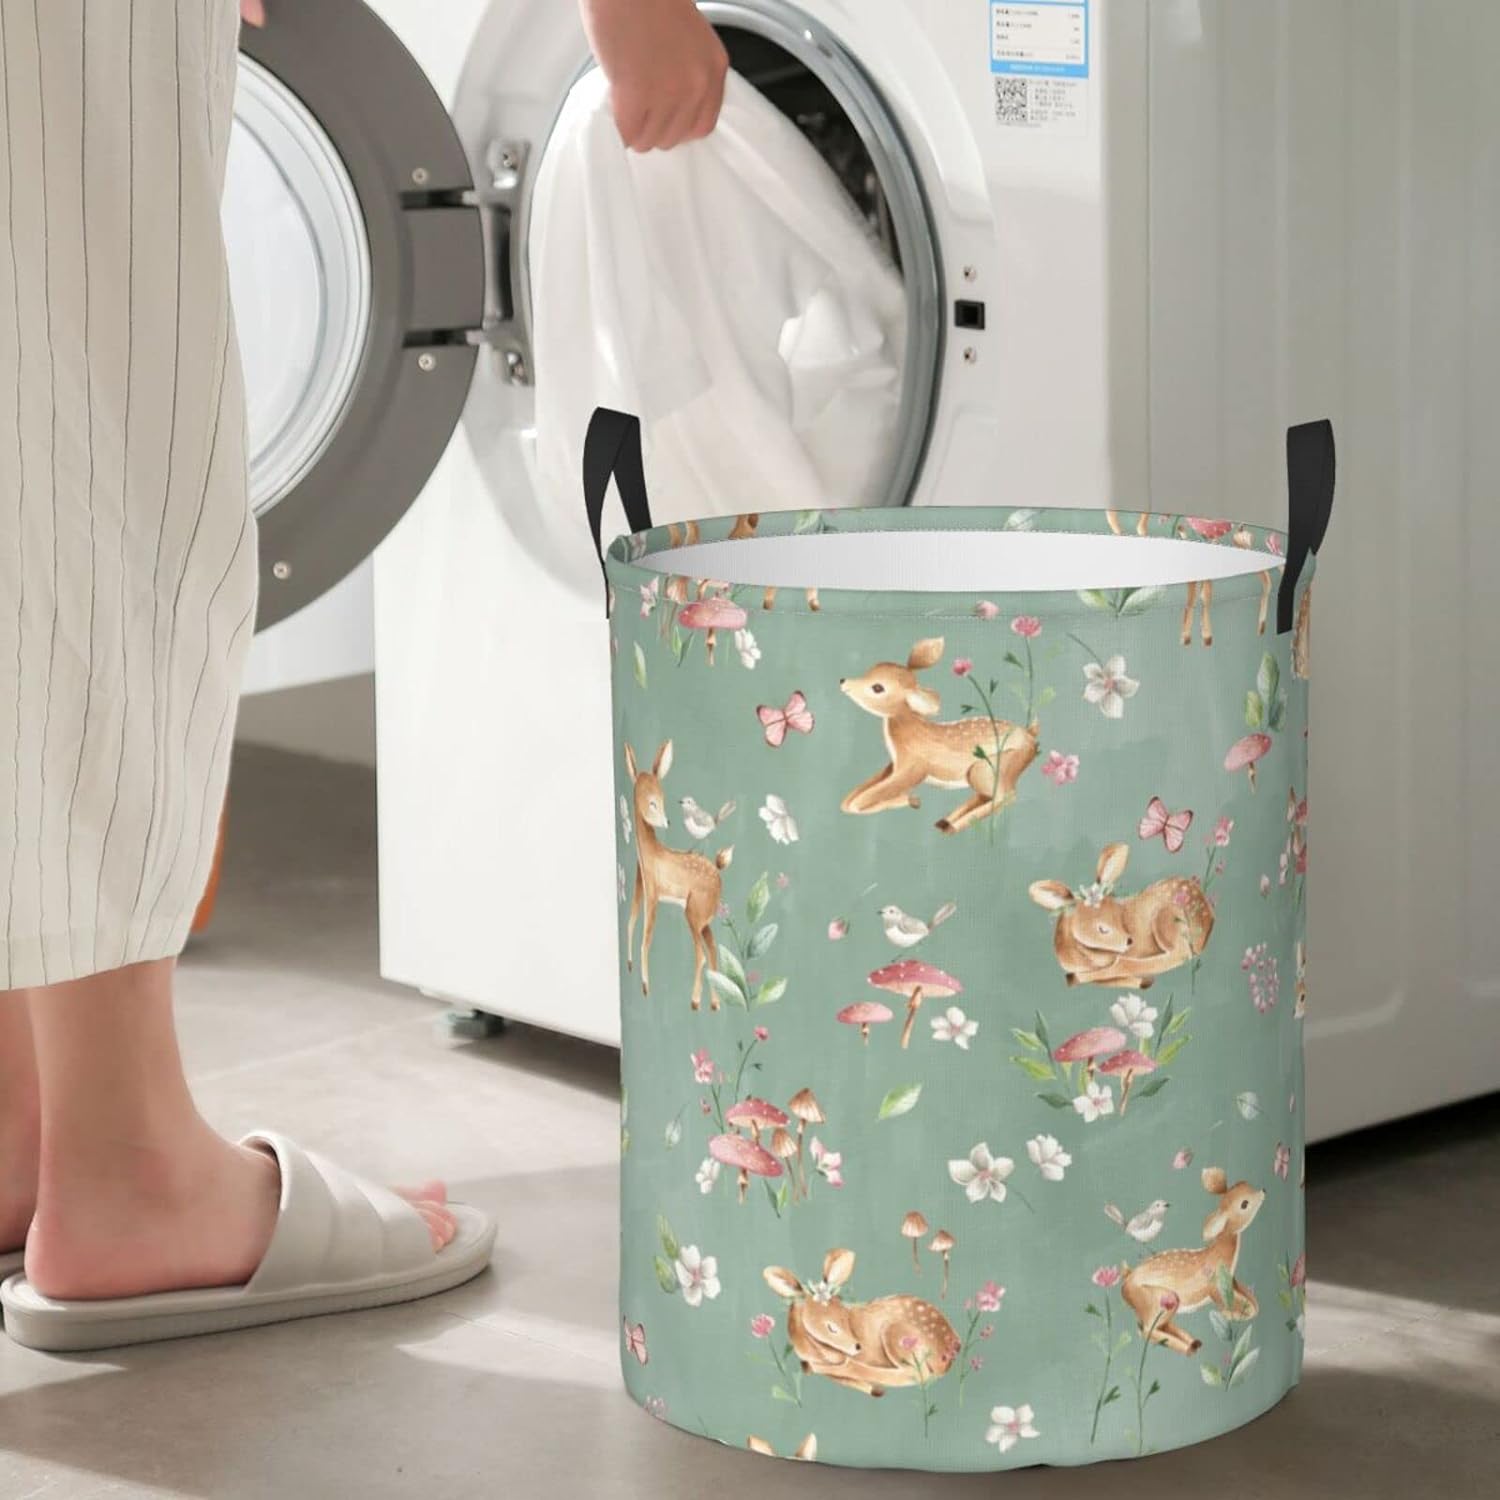 Great Choice Products 38L Round Laundry Hamper Cute Deers Storage Basket Waterproof Coating Woodland Forest Animals Butterflies And Flowers Orga